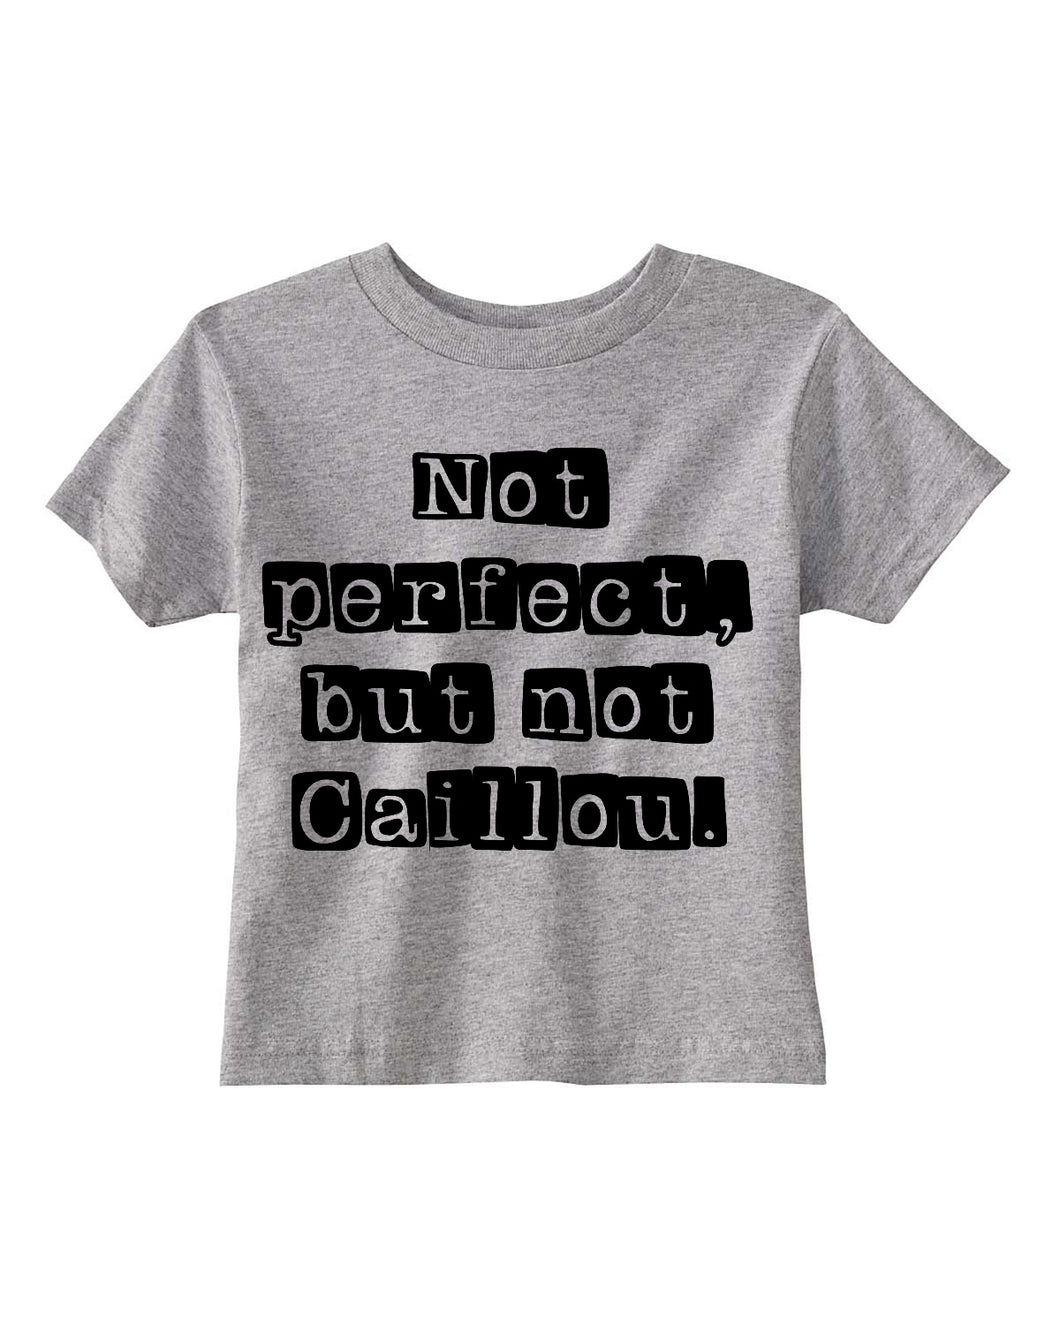 Not Perfect, but Not Caillou Kids Tee- Discontinued